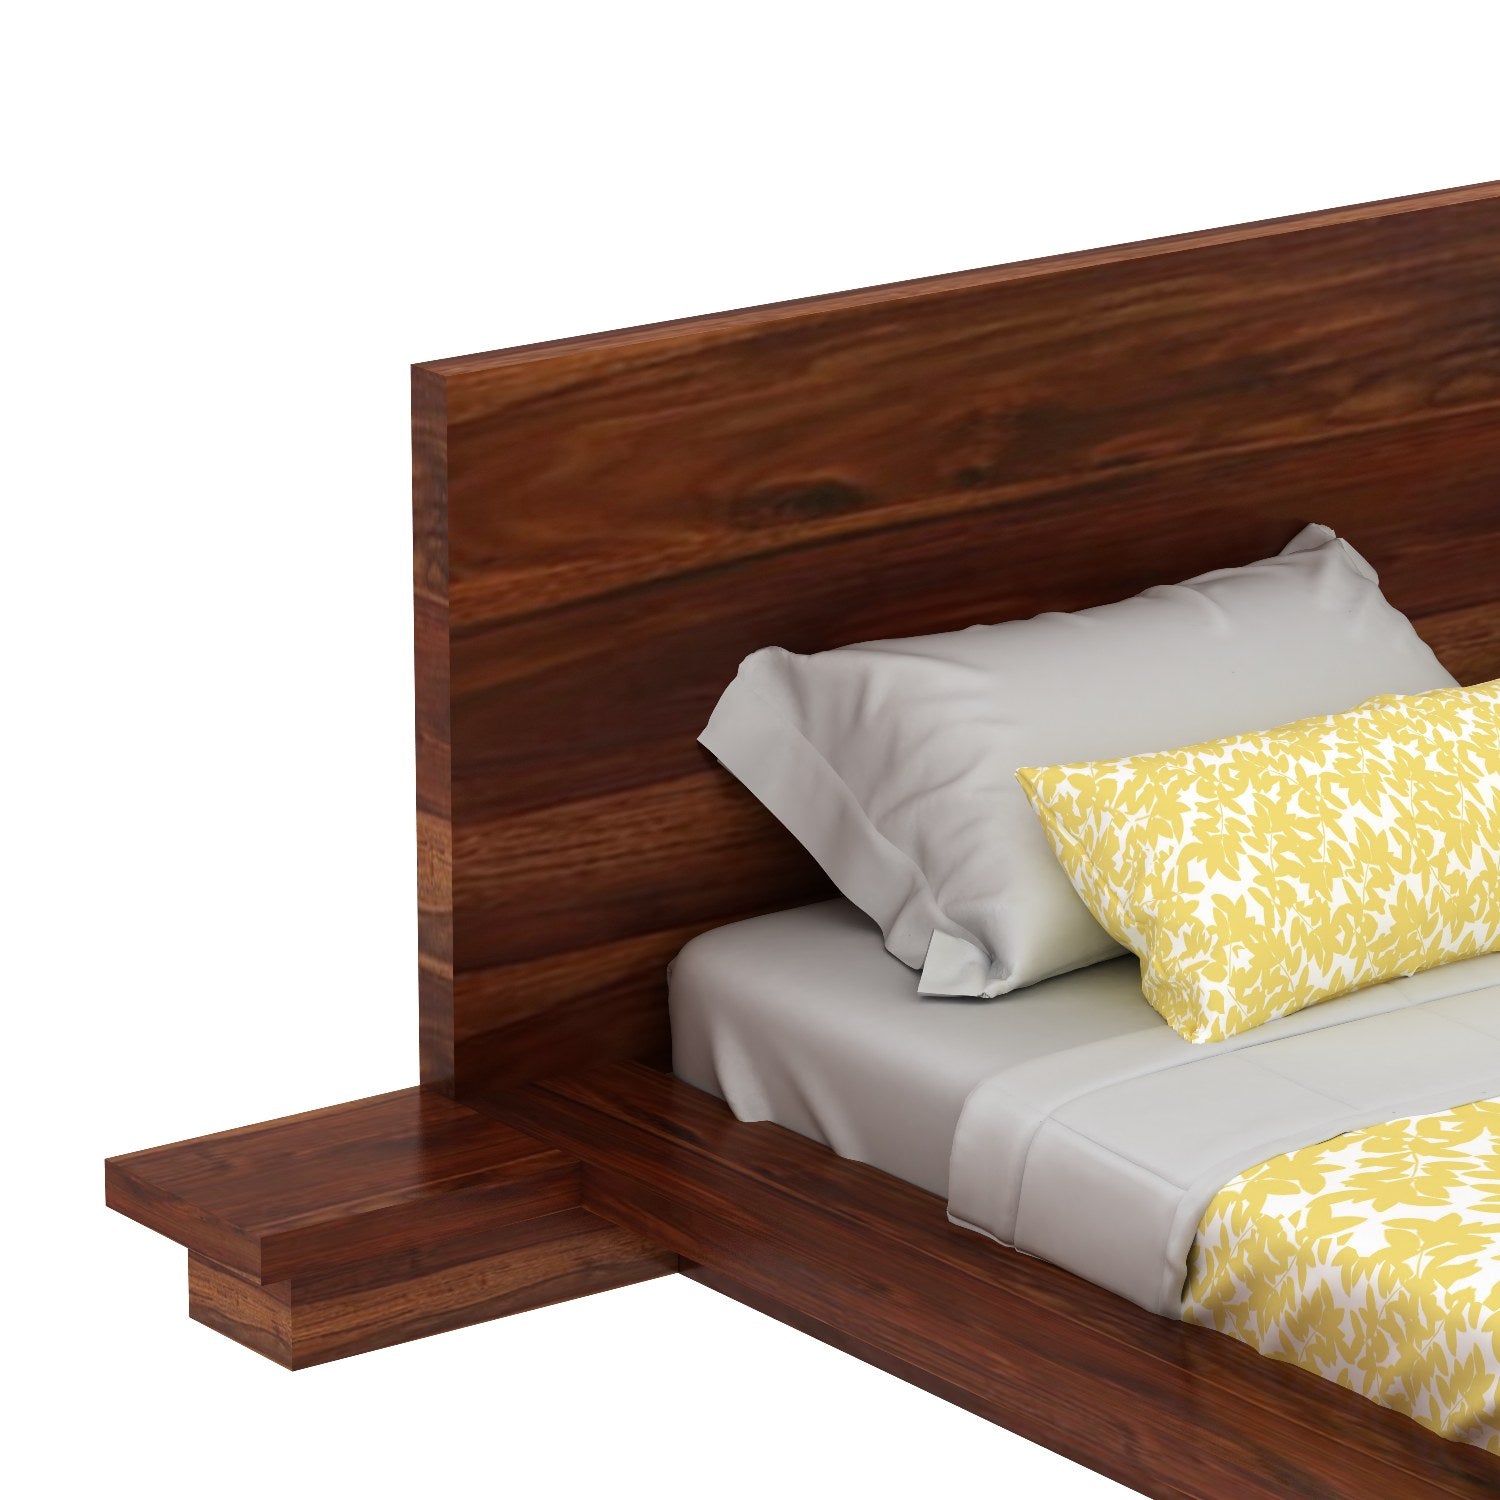 Woodora Solid Sheesham Wood Bed With Bedside Tables (King Size, Natural Finish)